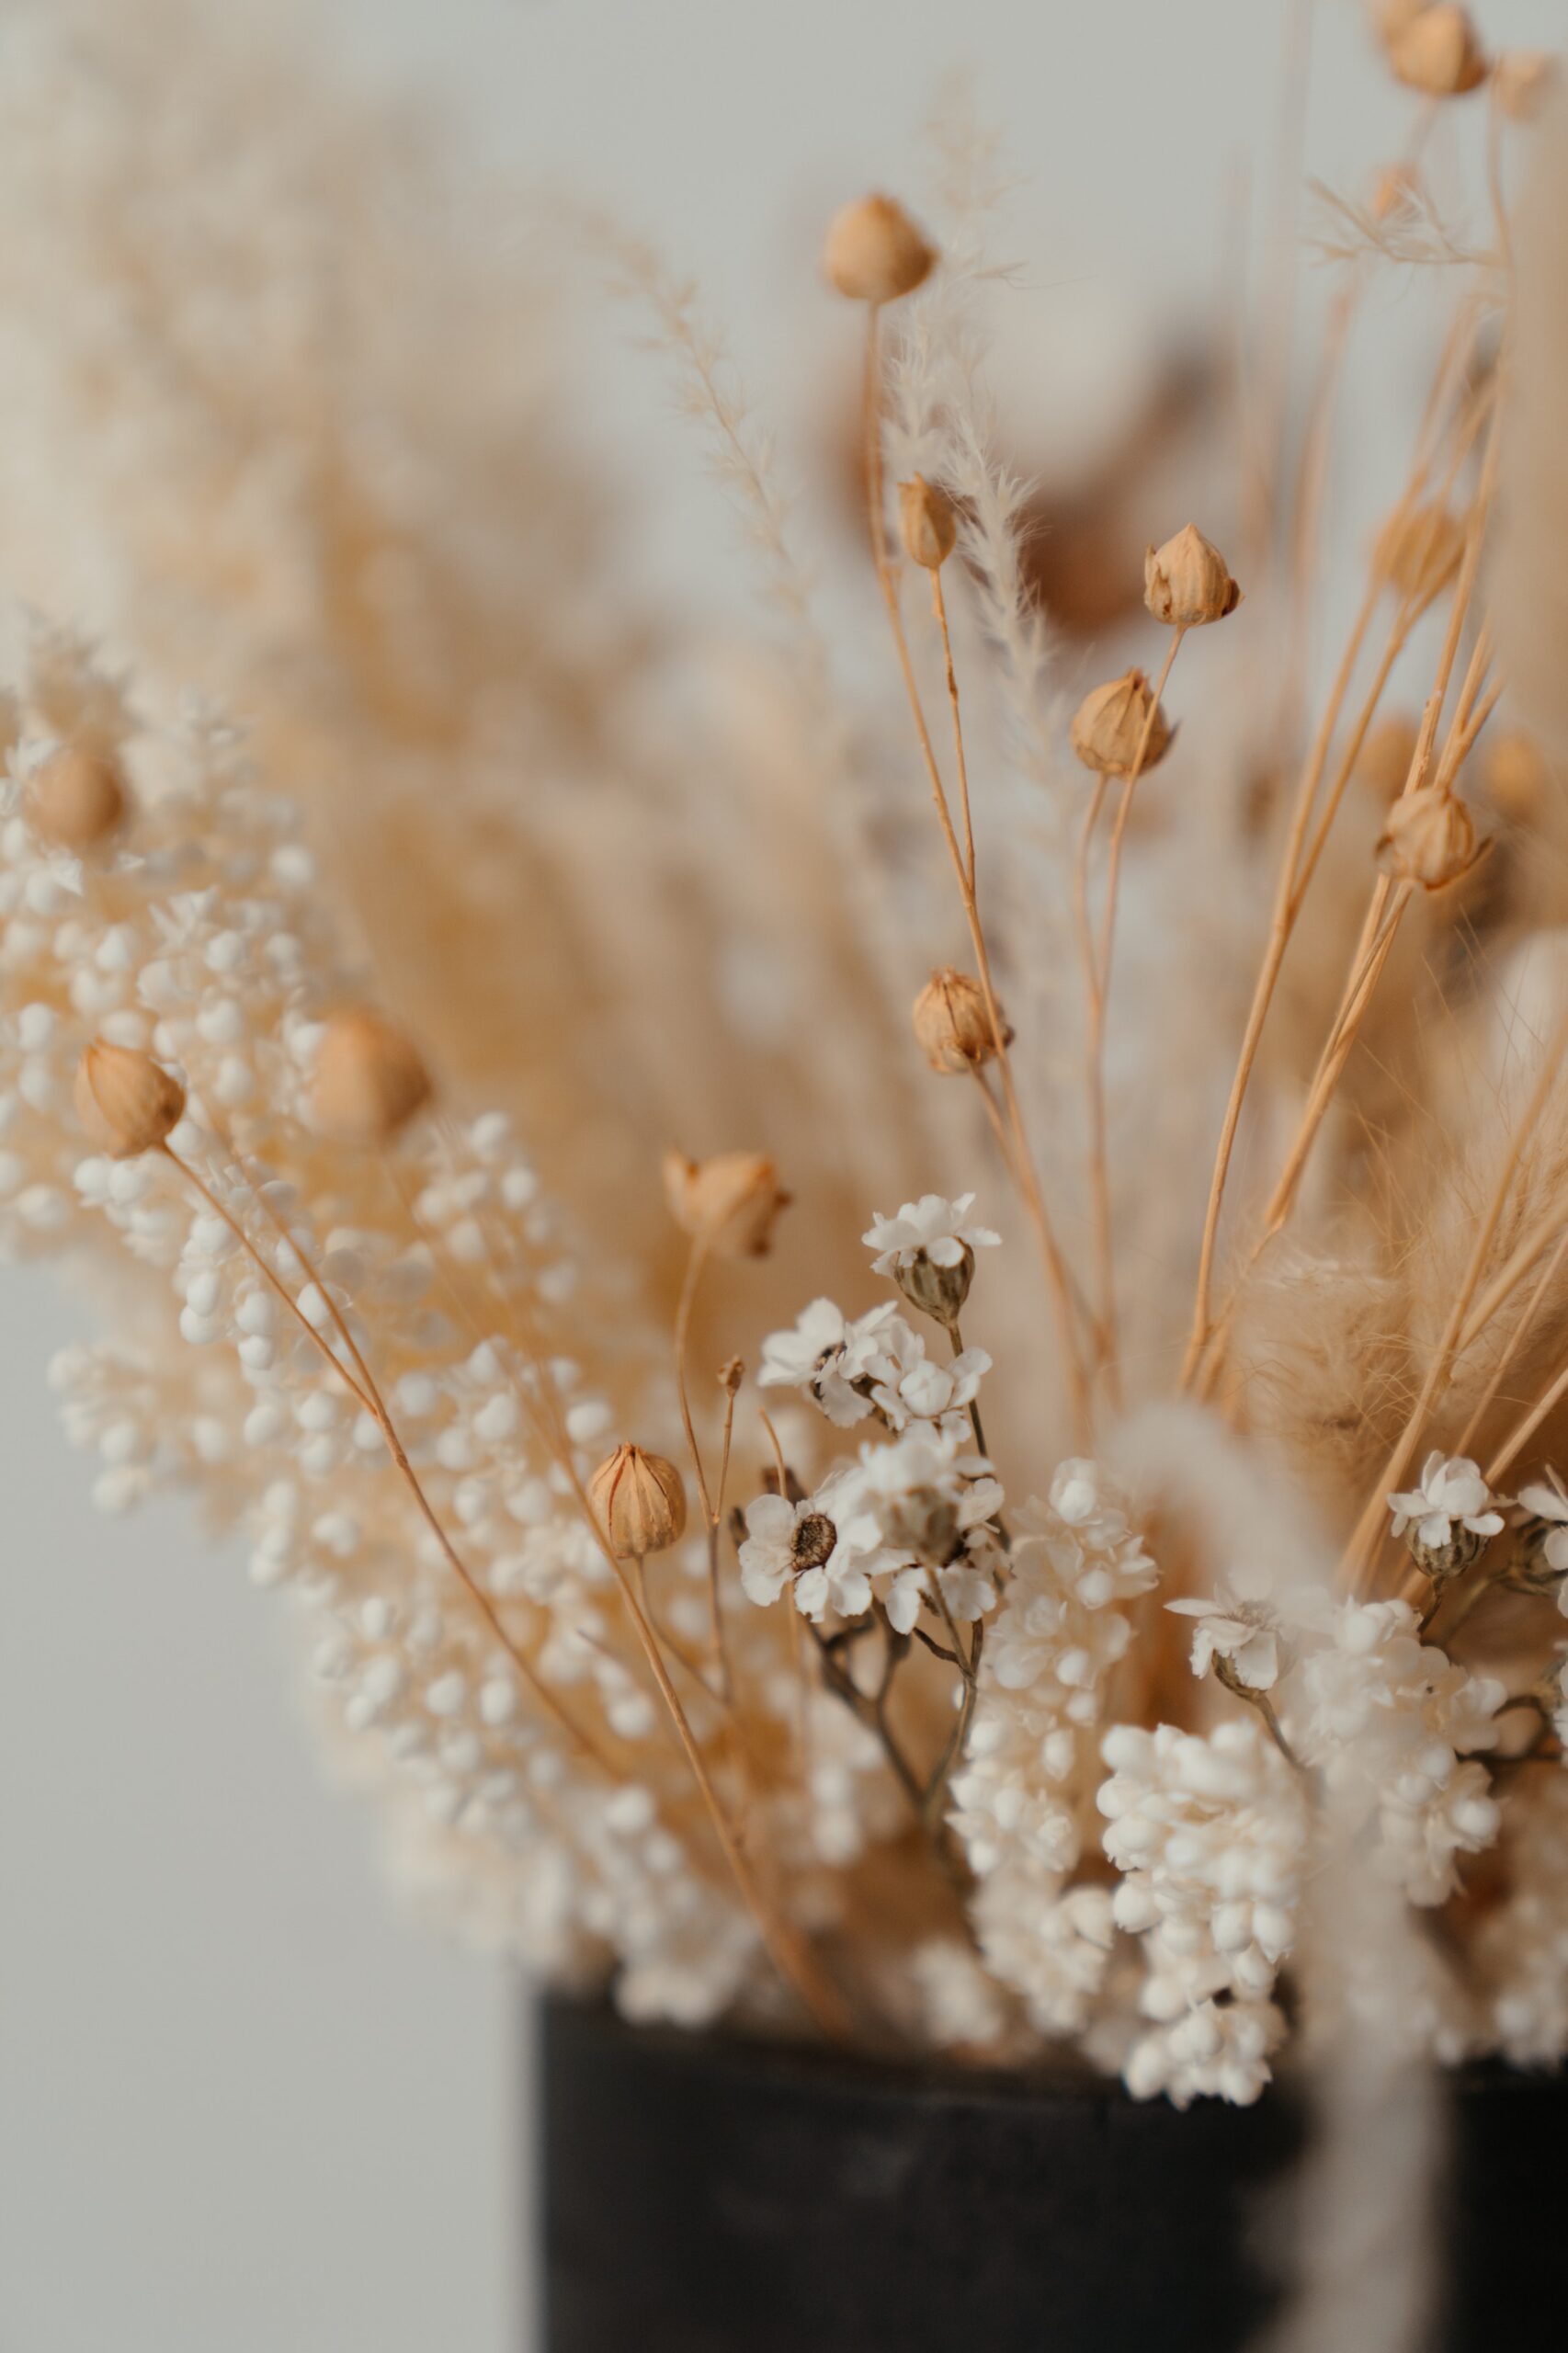 Bouquet of dried flowers.